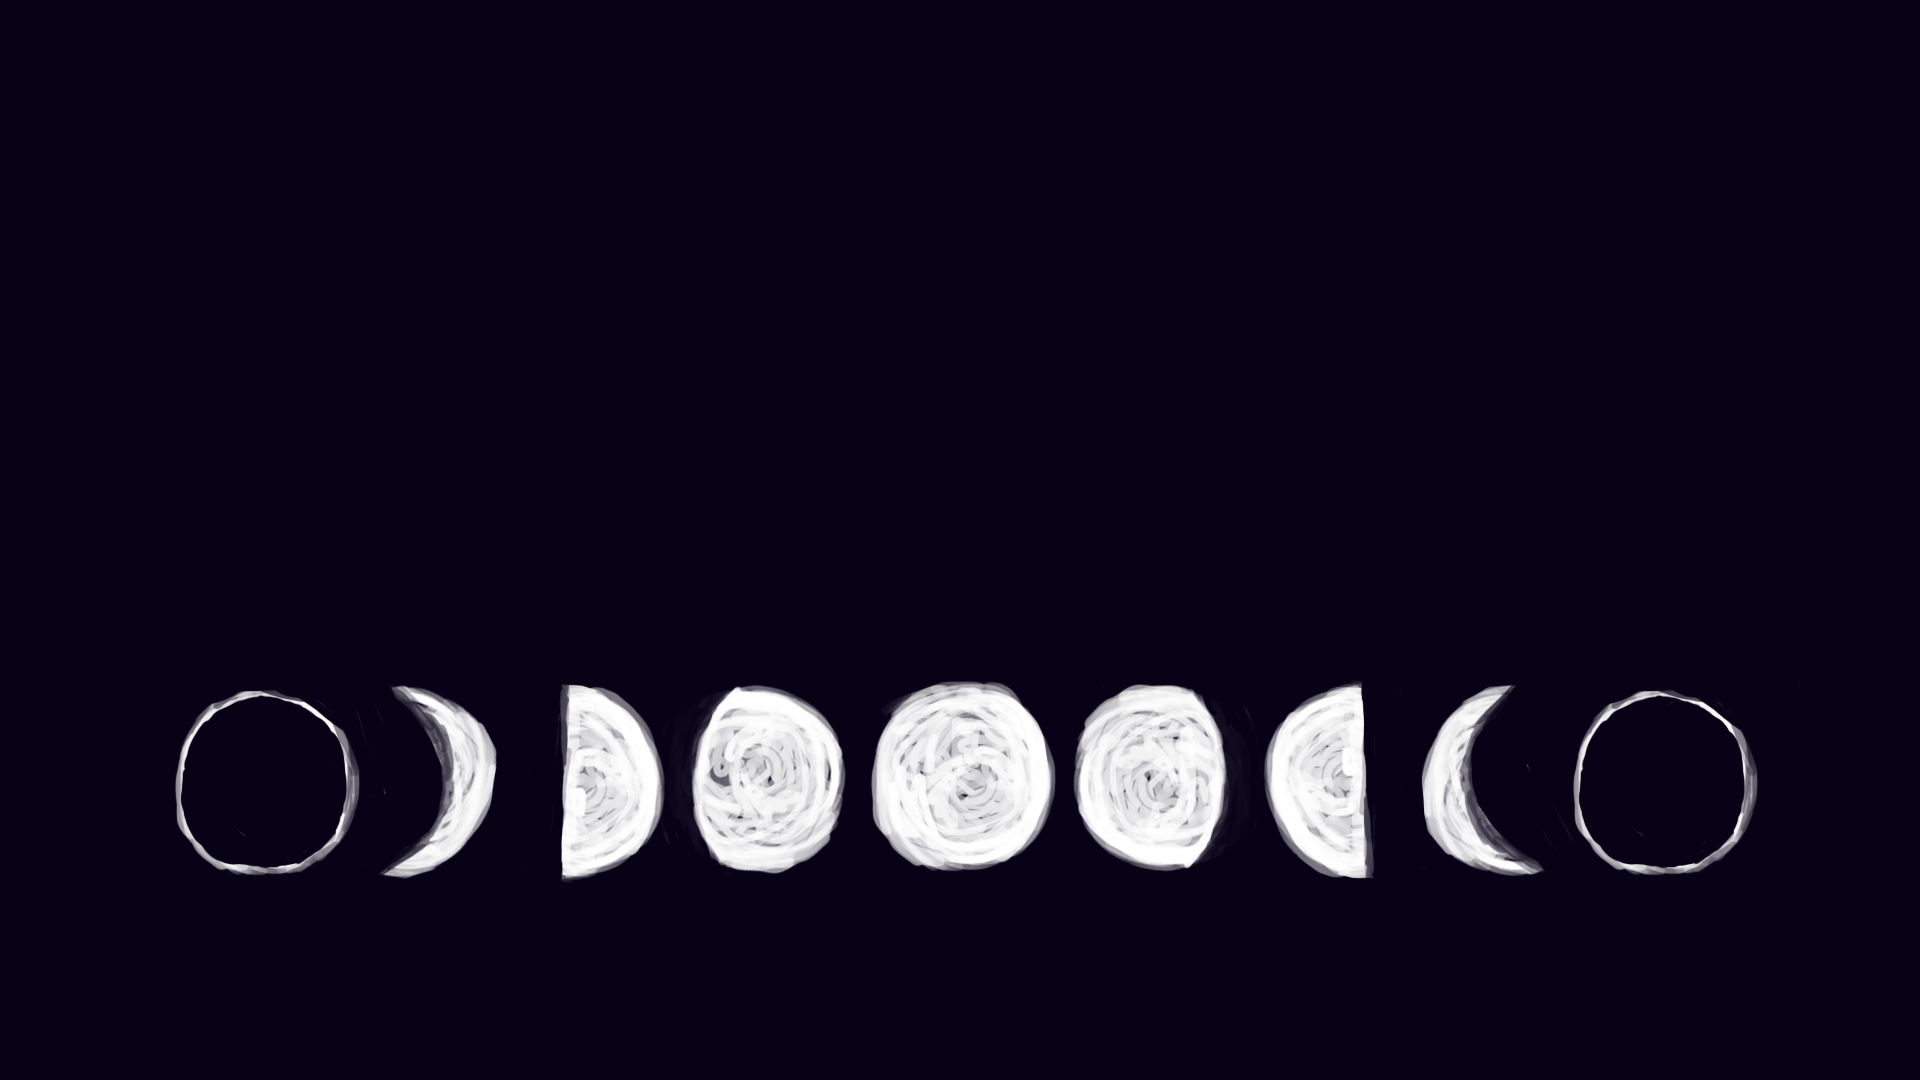 Moon Phases 4k Wallpaper Free Moon Phases 4k Background